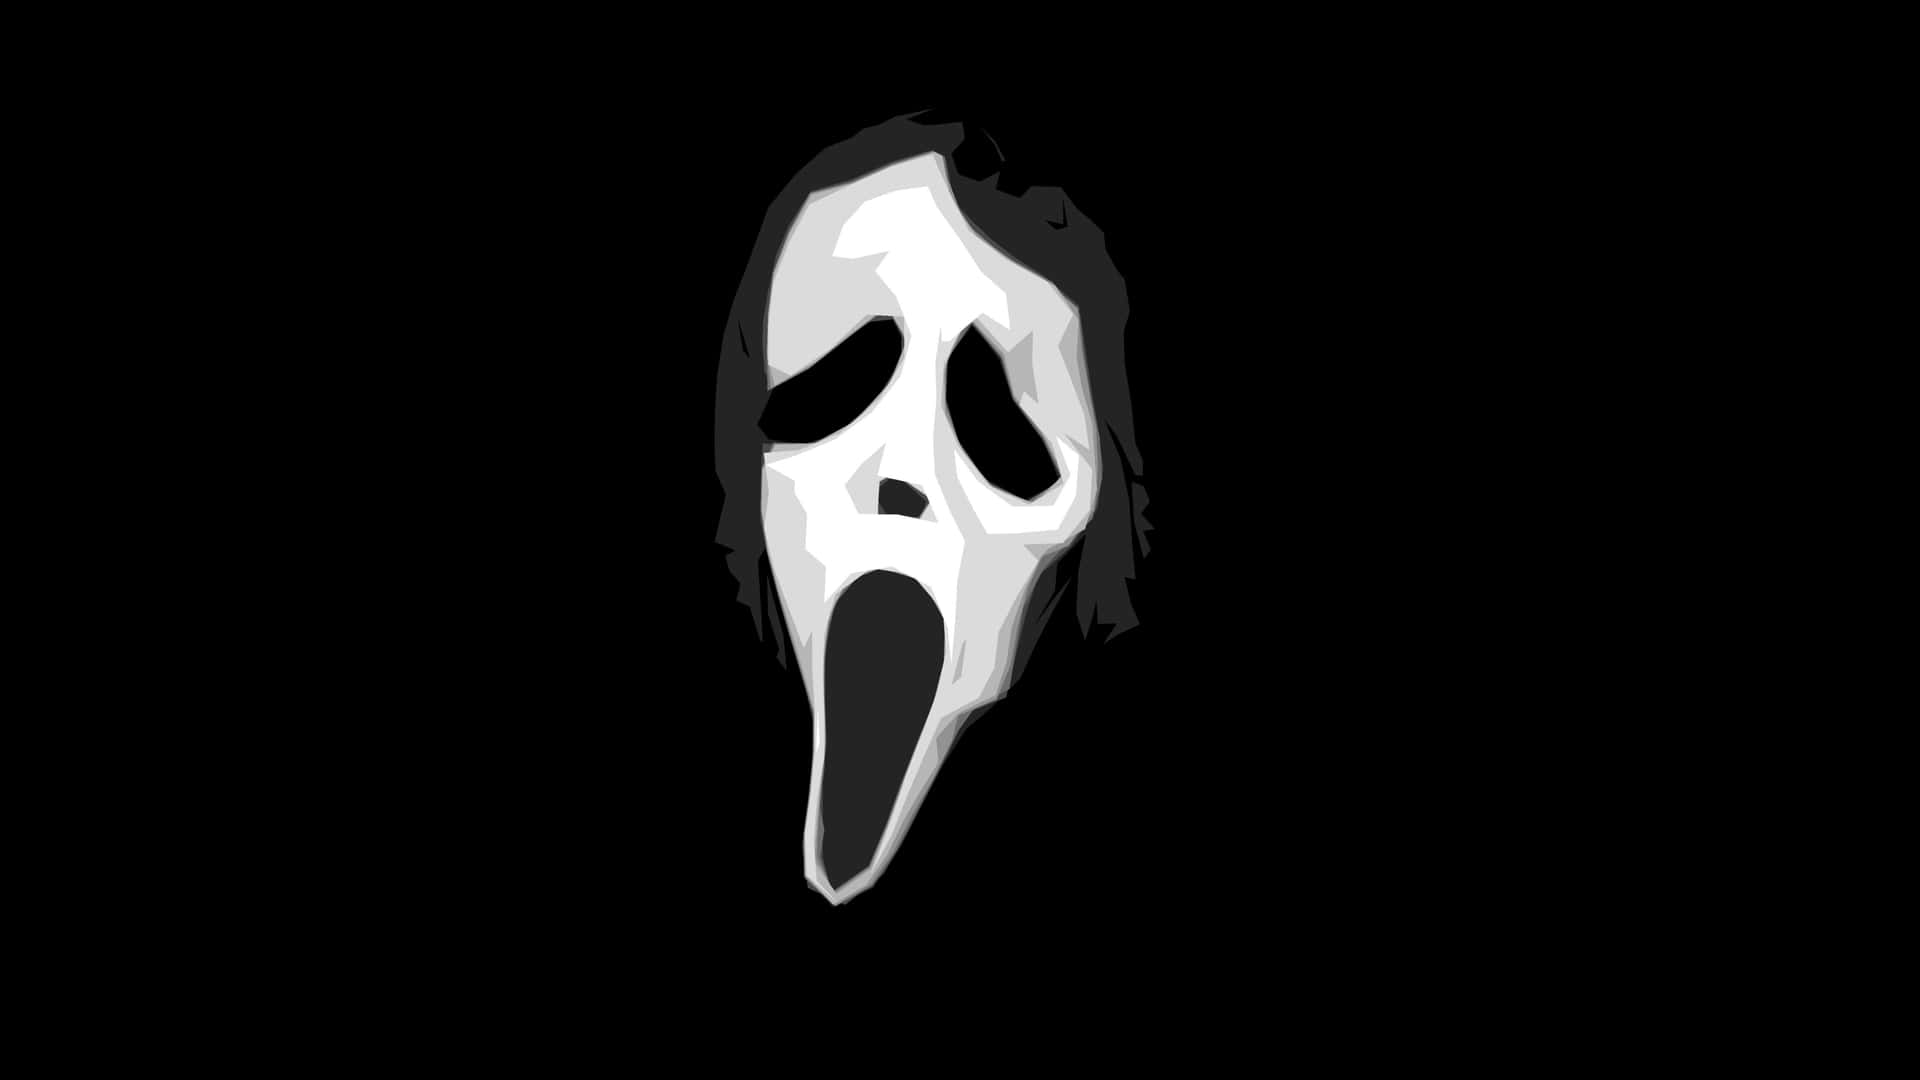 Free Ghost Face Pfp Wallpaper Downloads, Ghost Face Pfp Wallpaper for FREE